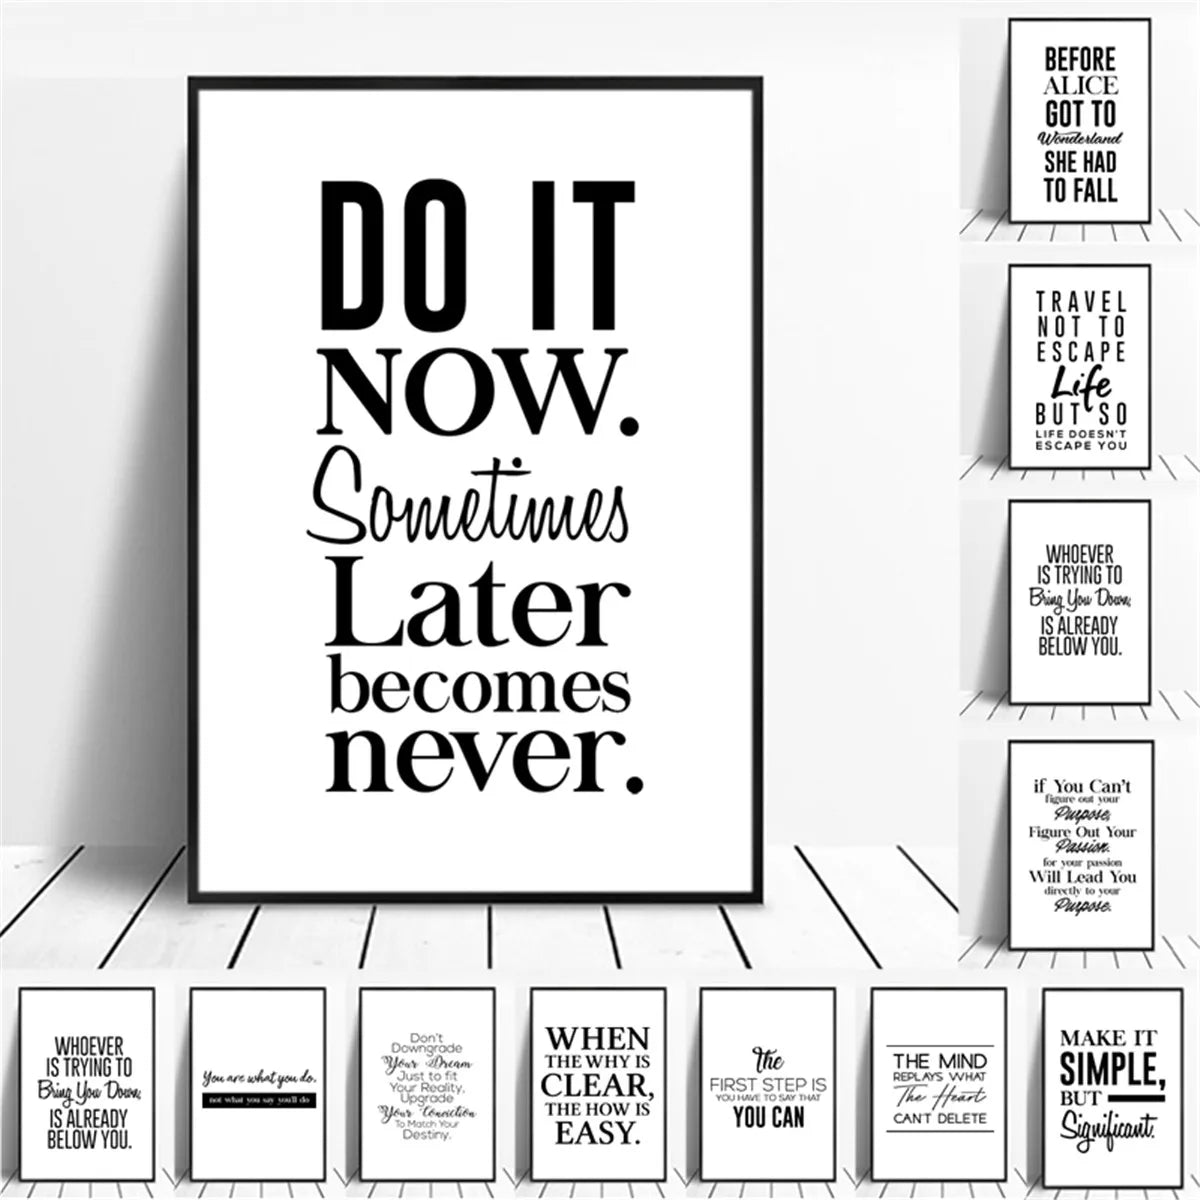 English Inspirational Quotes Words Poster Canvas Print Painting Wall Art Living Room Home Decoration